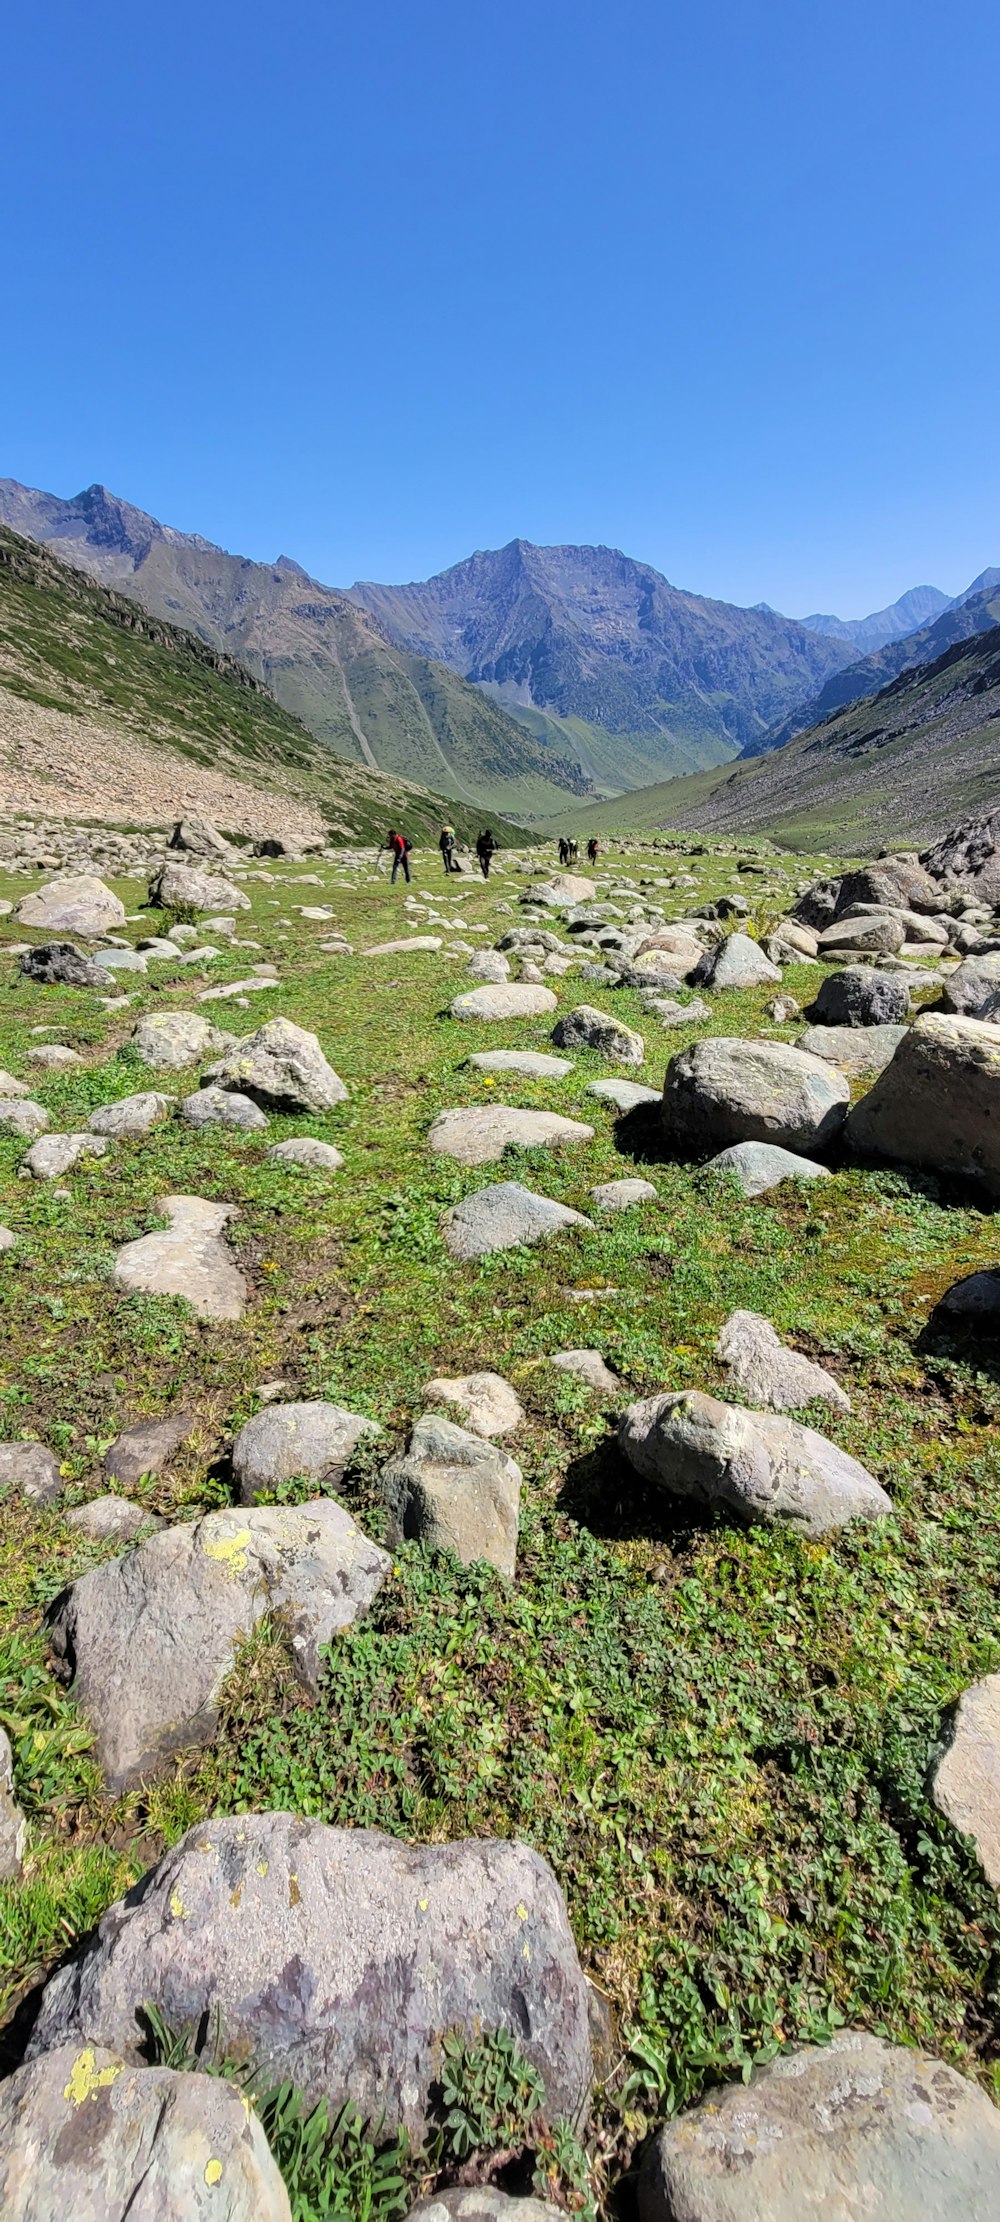 a group of people walking on a rocky path in a valley